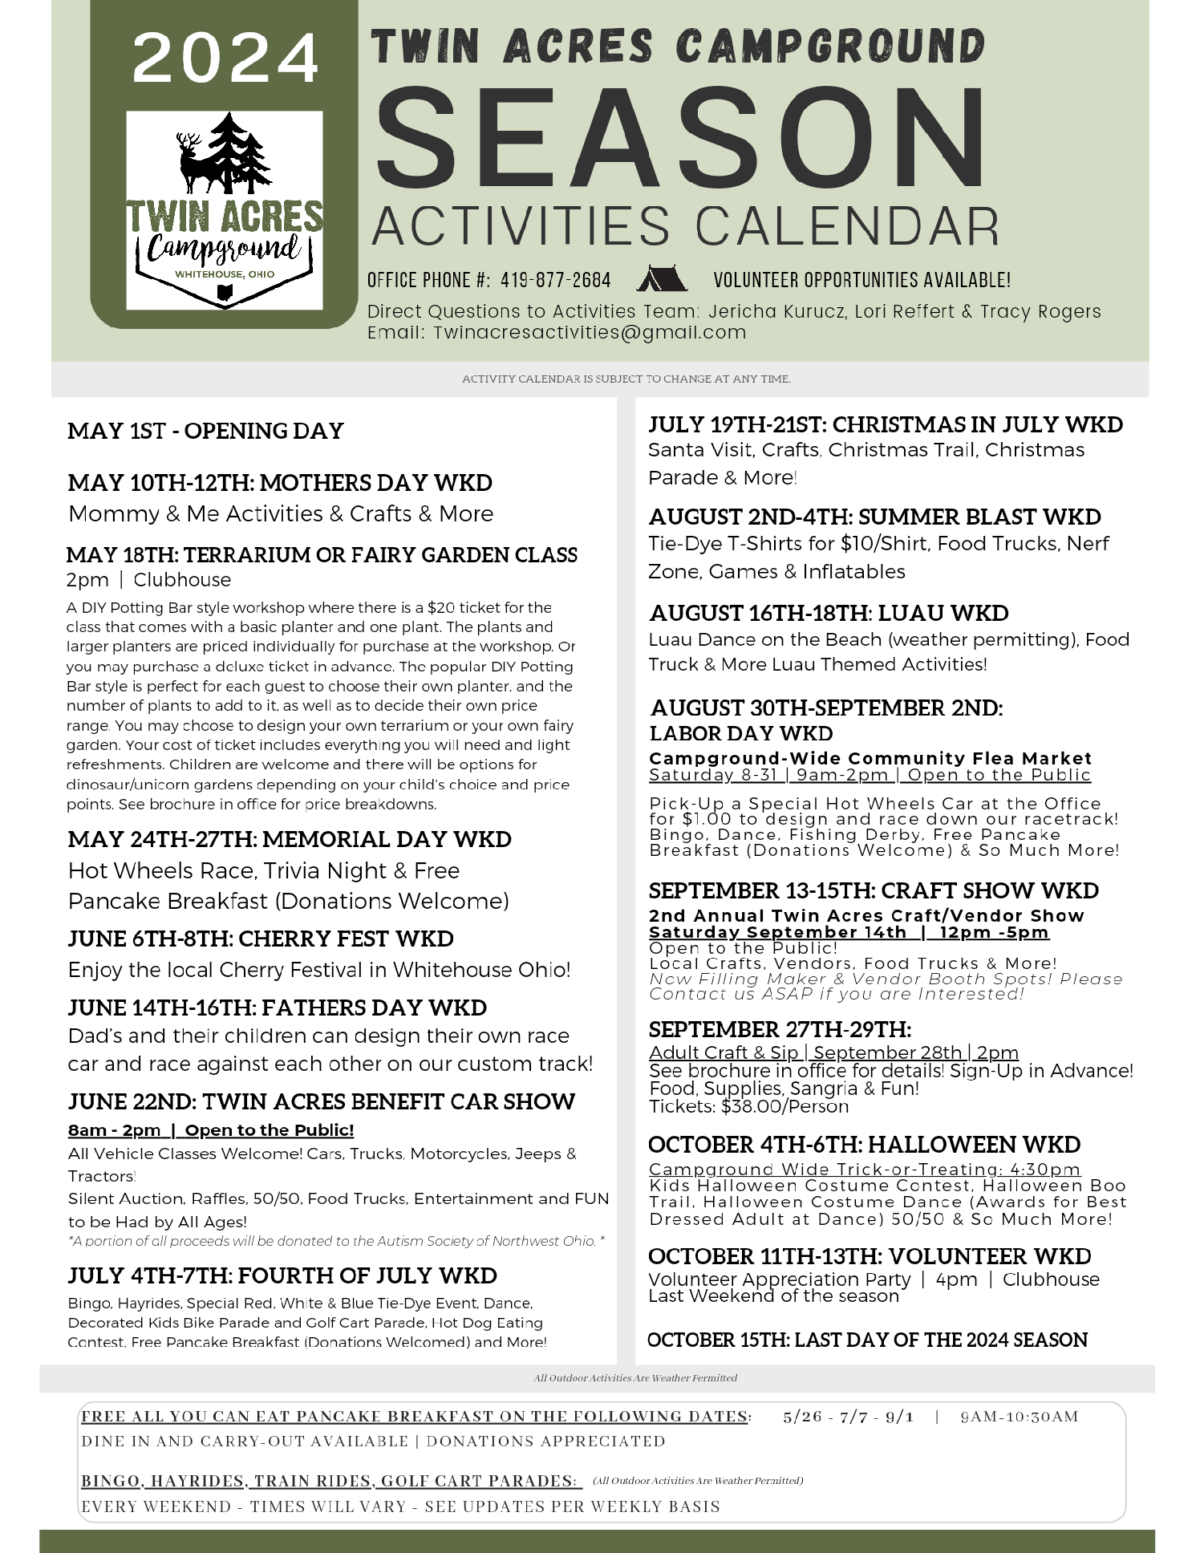 Twin Acres Campground 2024 Activities Calendar - Full Version